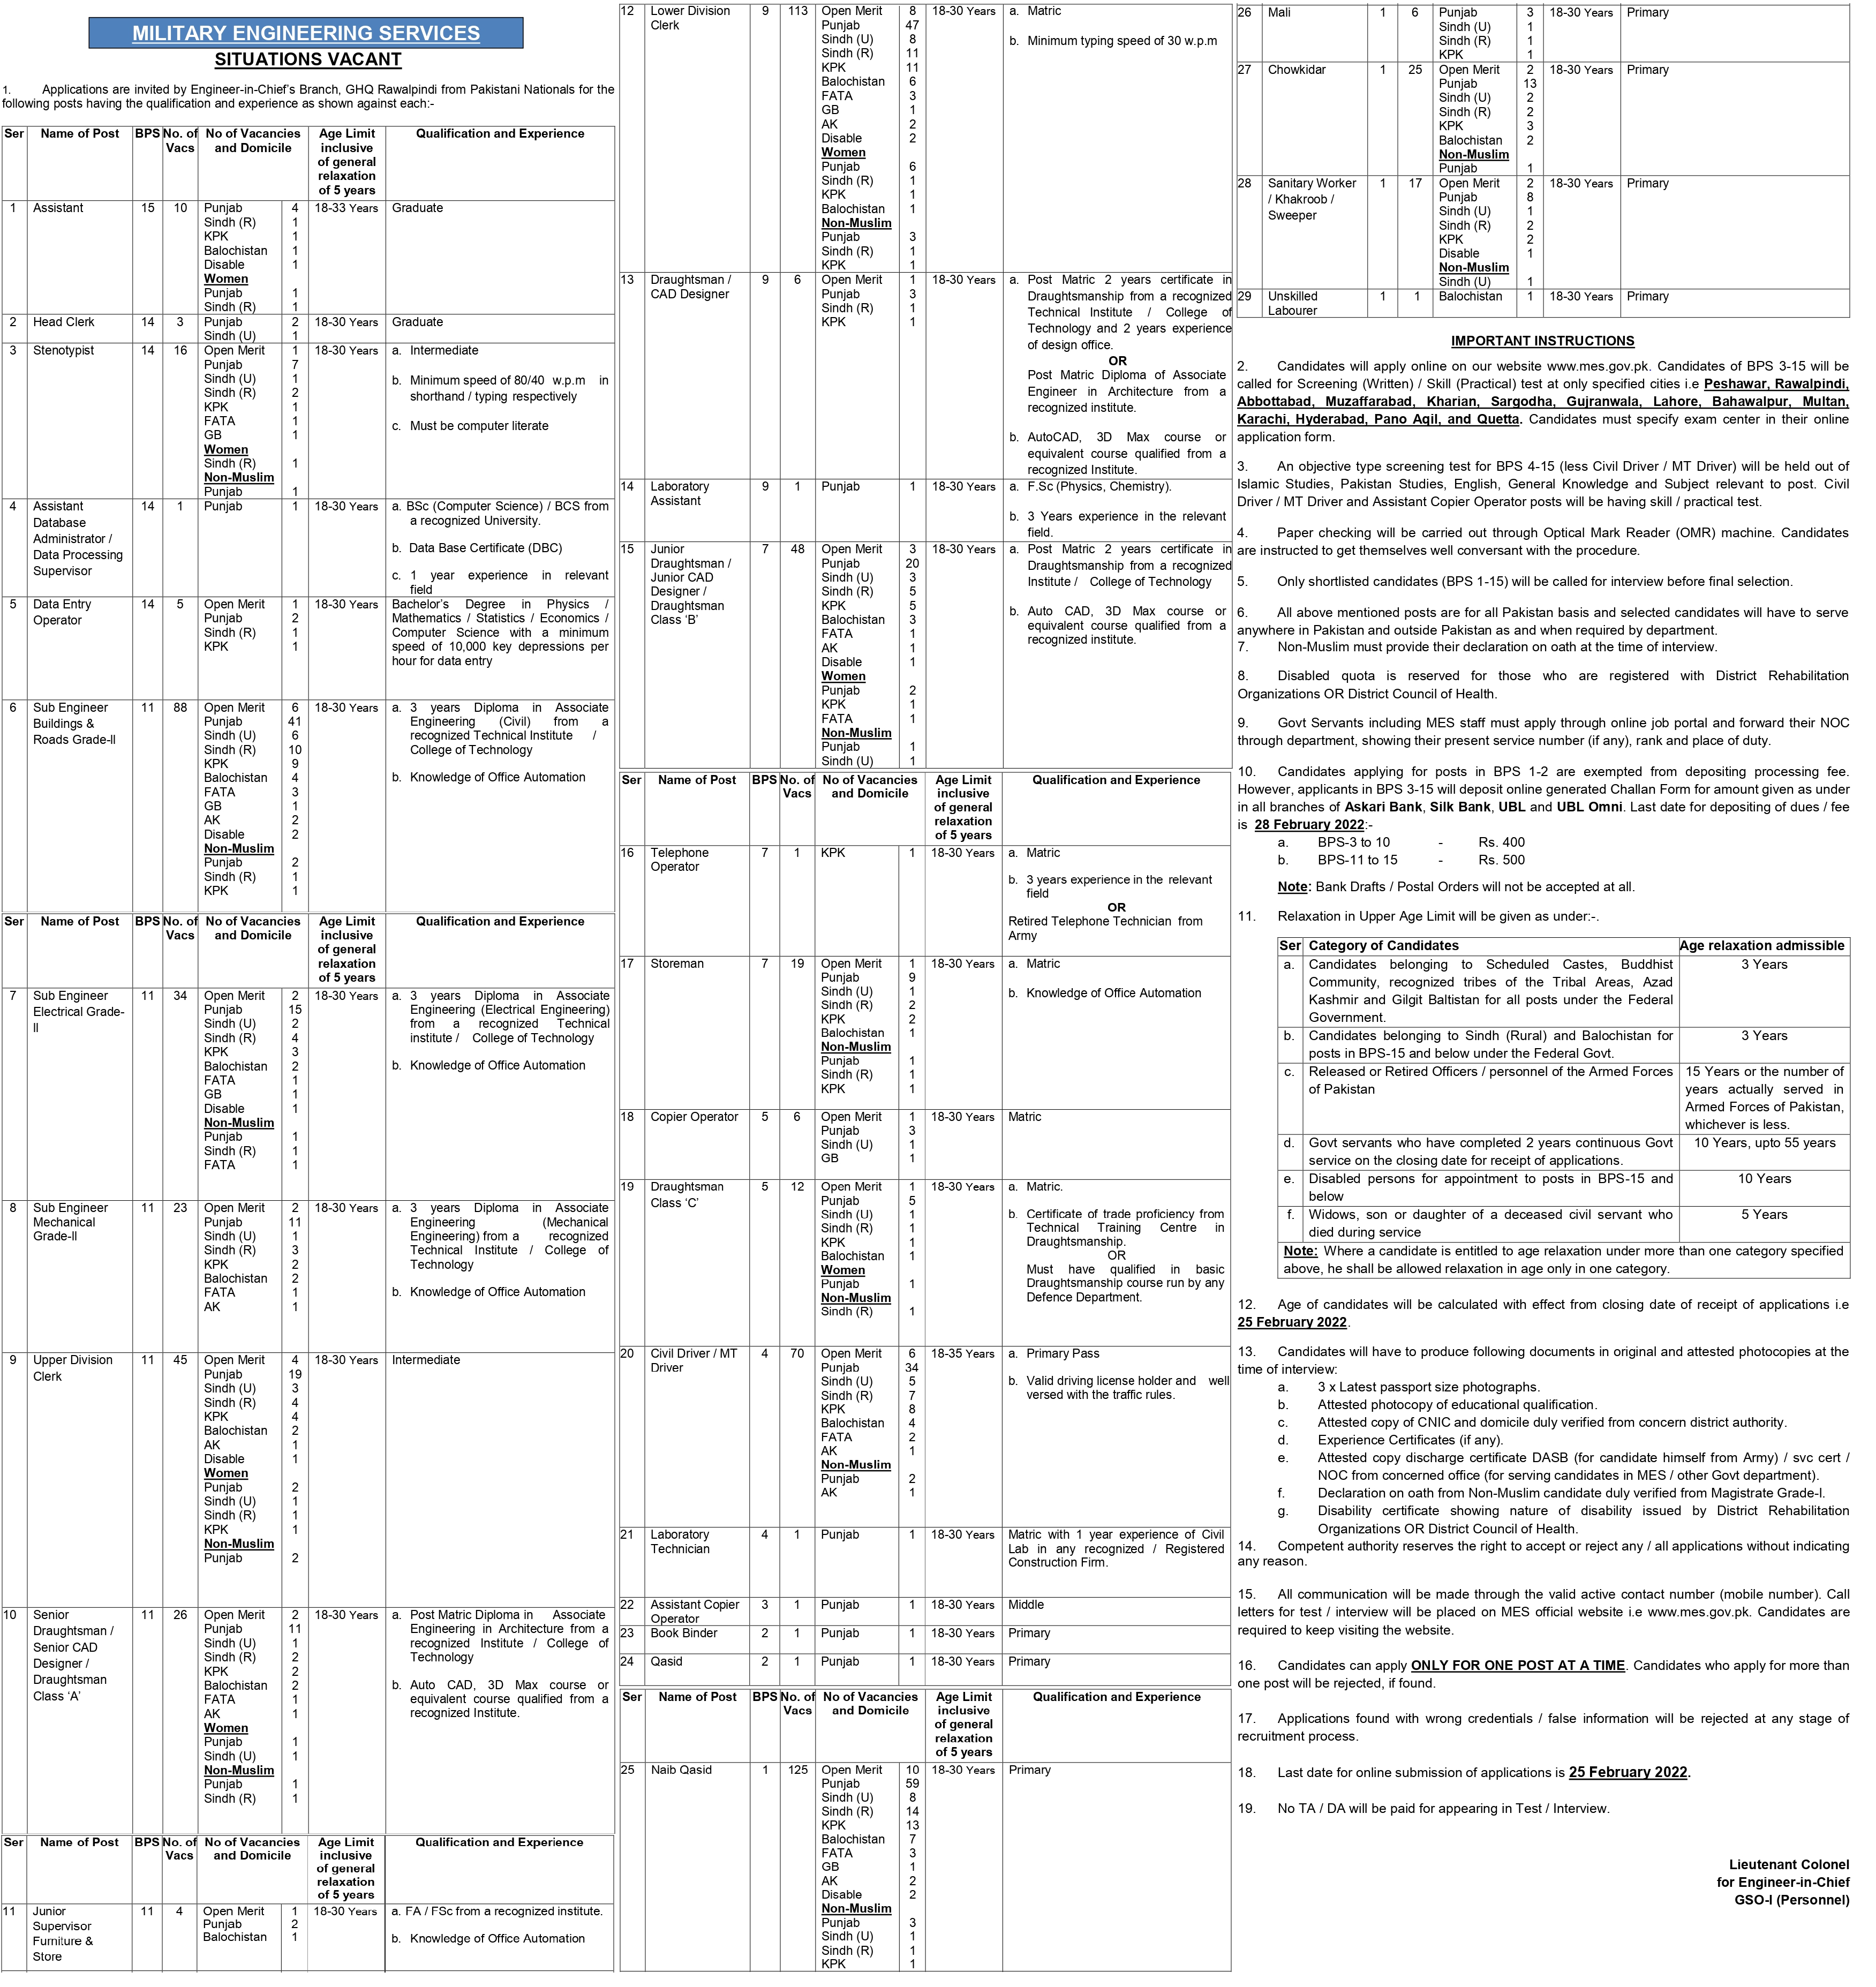 MES Jobs 2022 Military Engineering Services for Pakistanis – www.jobs.mes.gov.pk